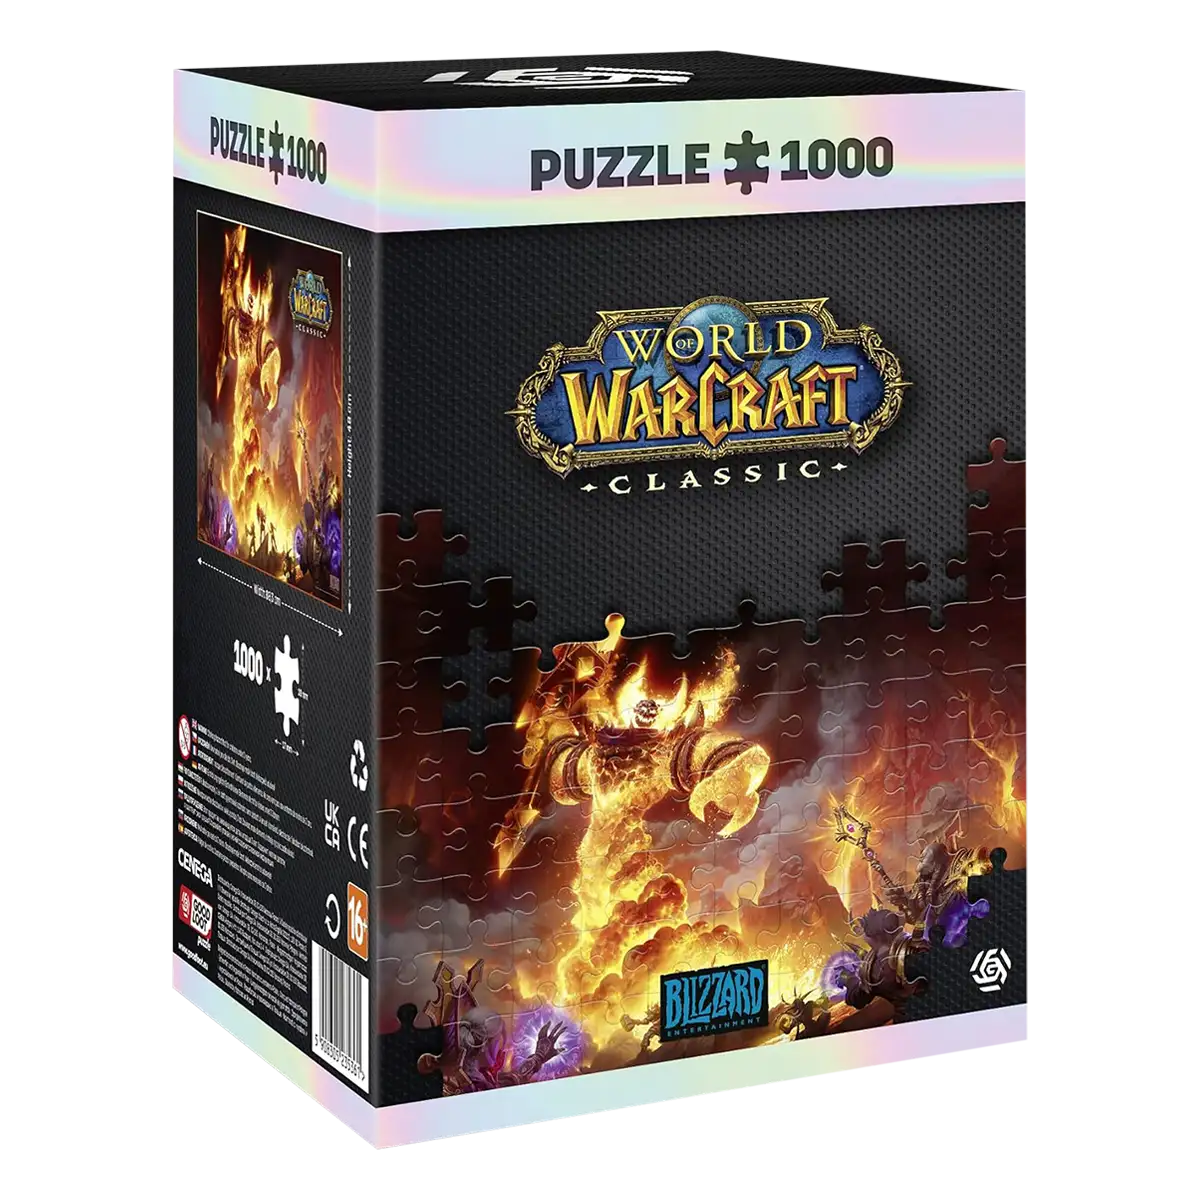 World of Warcraft: Classic Puzzle "Ragnaros" (1000 pcs) Cover